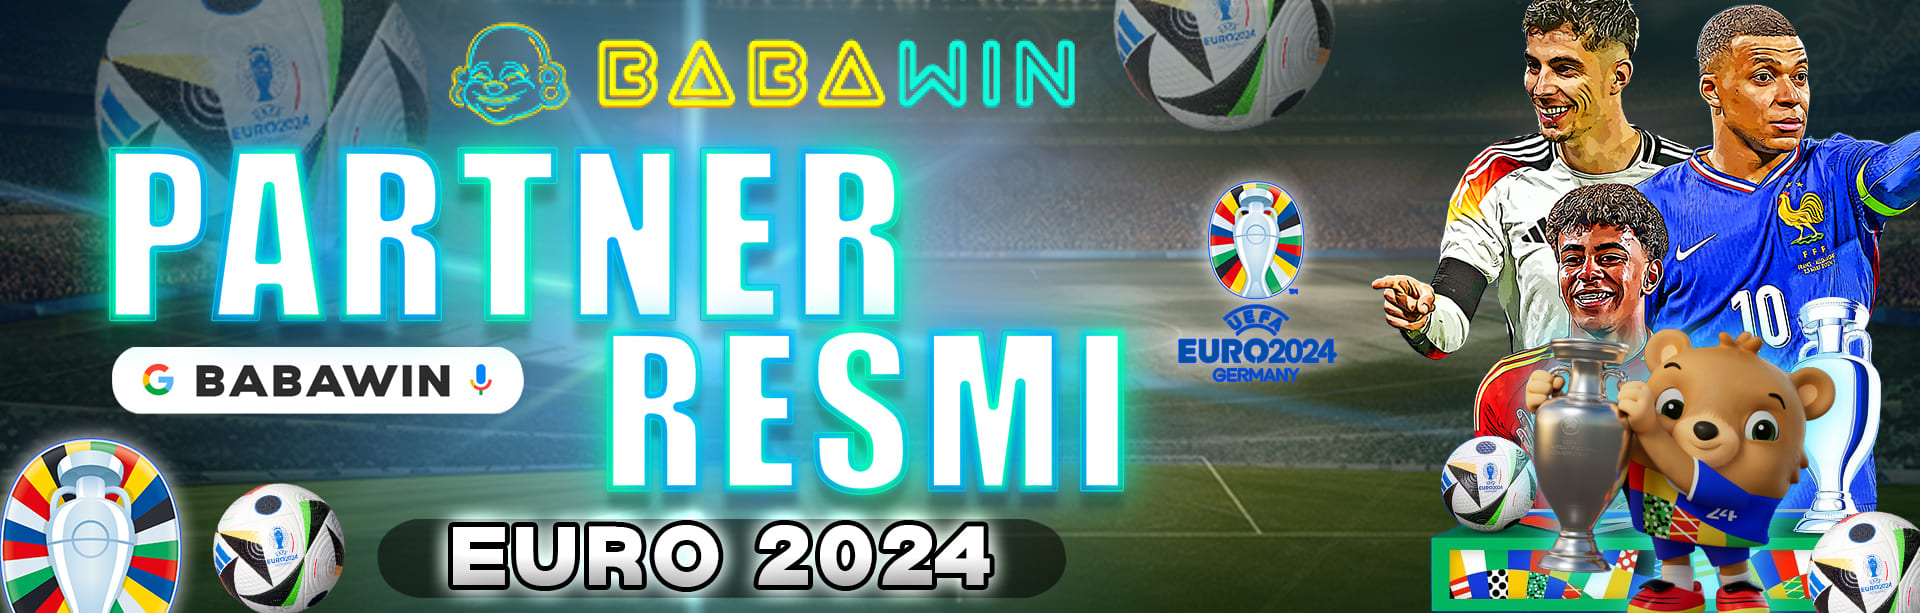 BABAWIN OFFICIAL RESMI EURO 2024